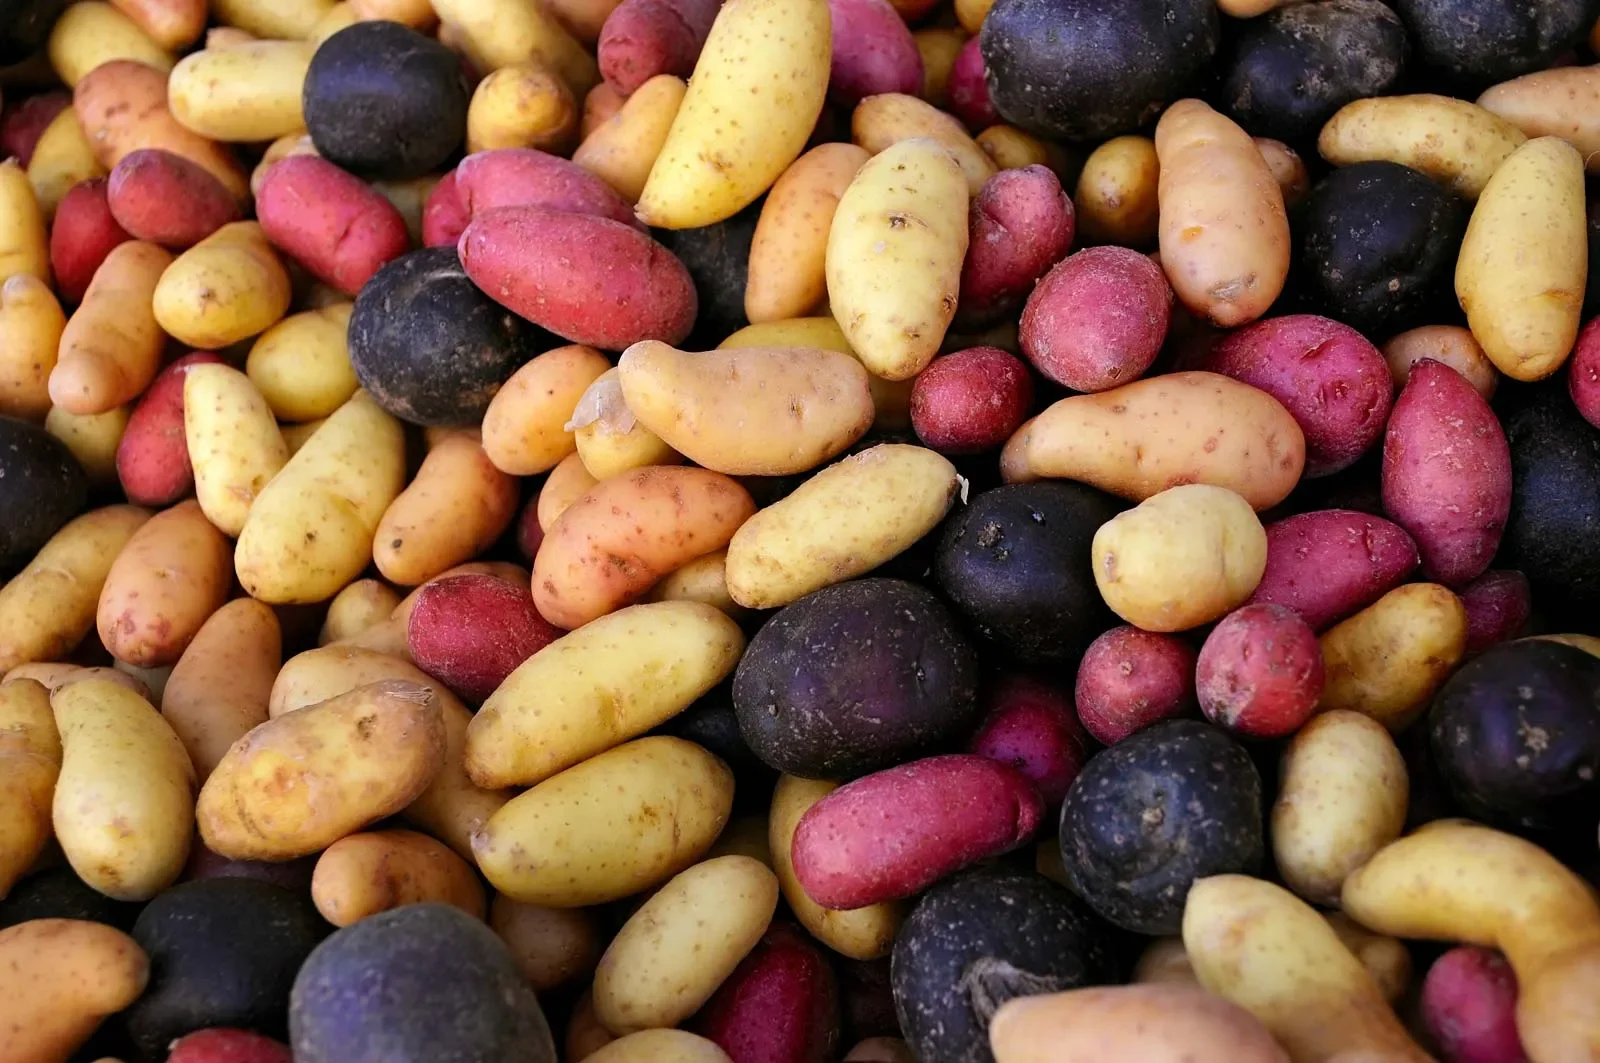 A variety of potatoes. Image by Bruceman.